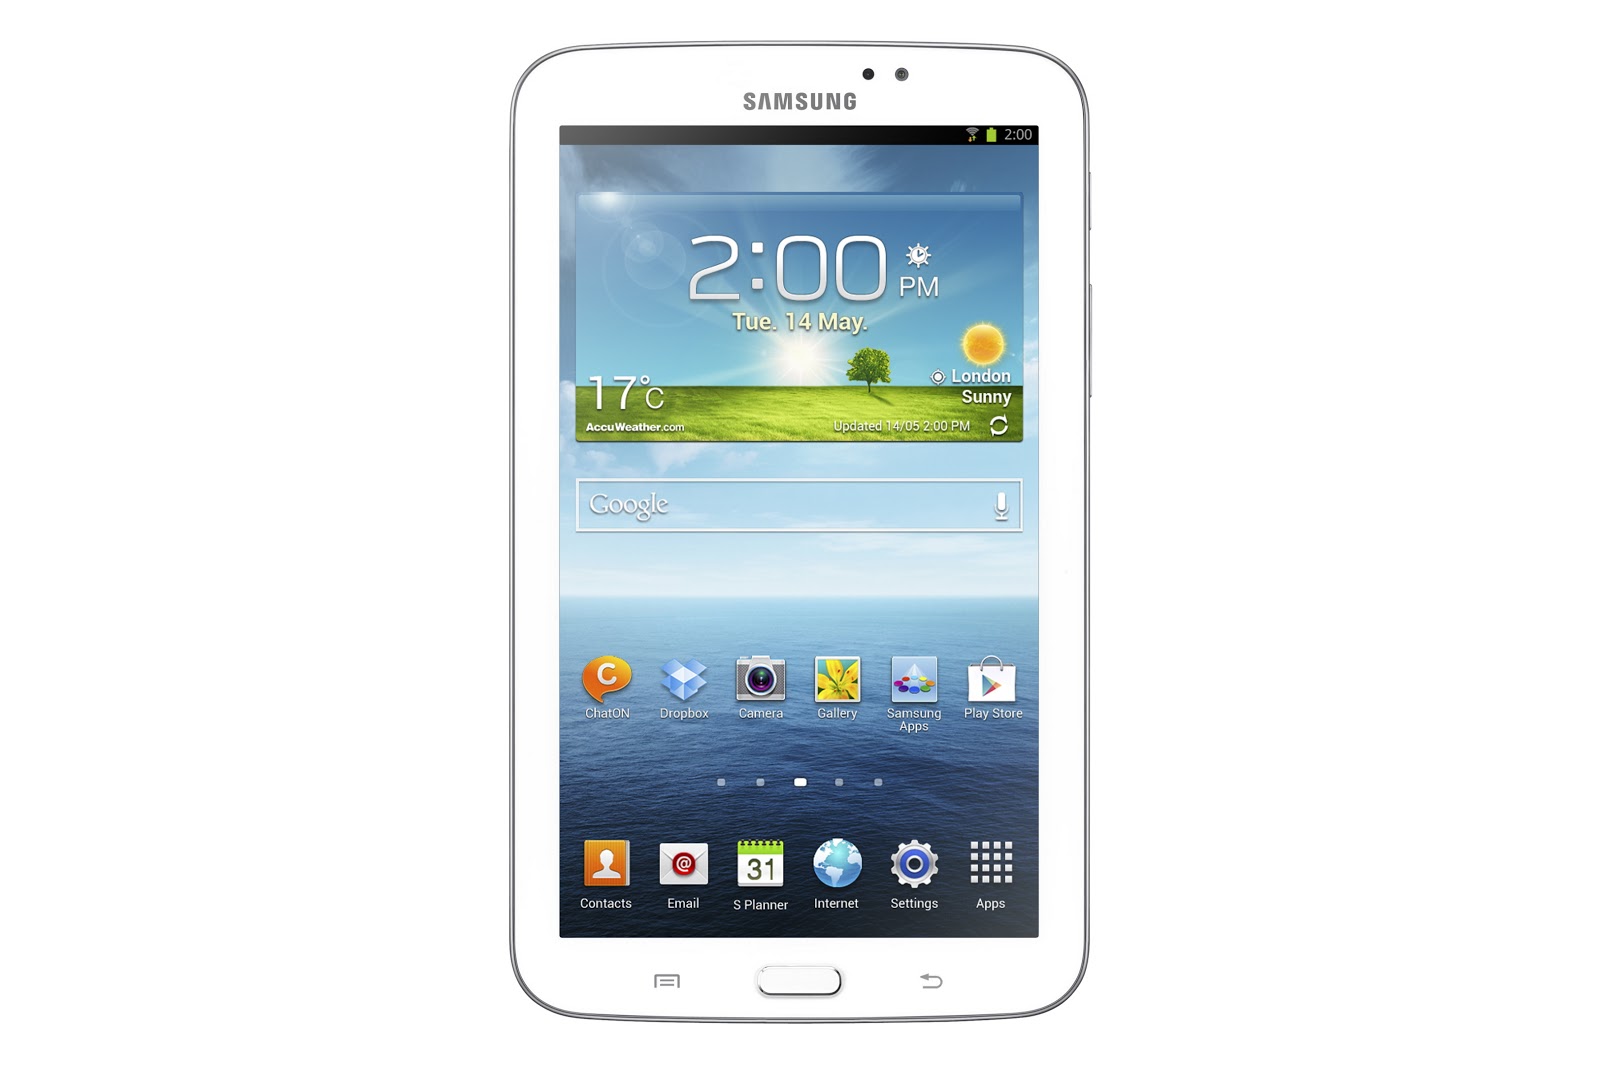 Samsung Galaxy Tab 3 (pictures) | Amnay Technology